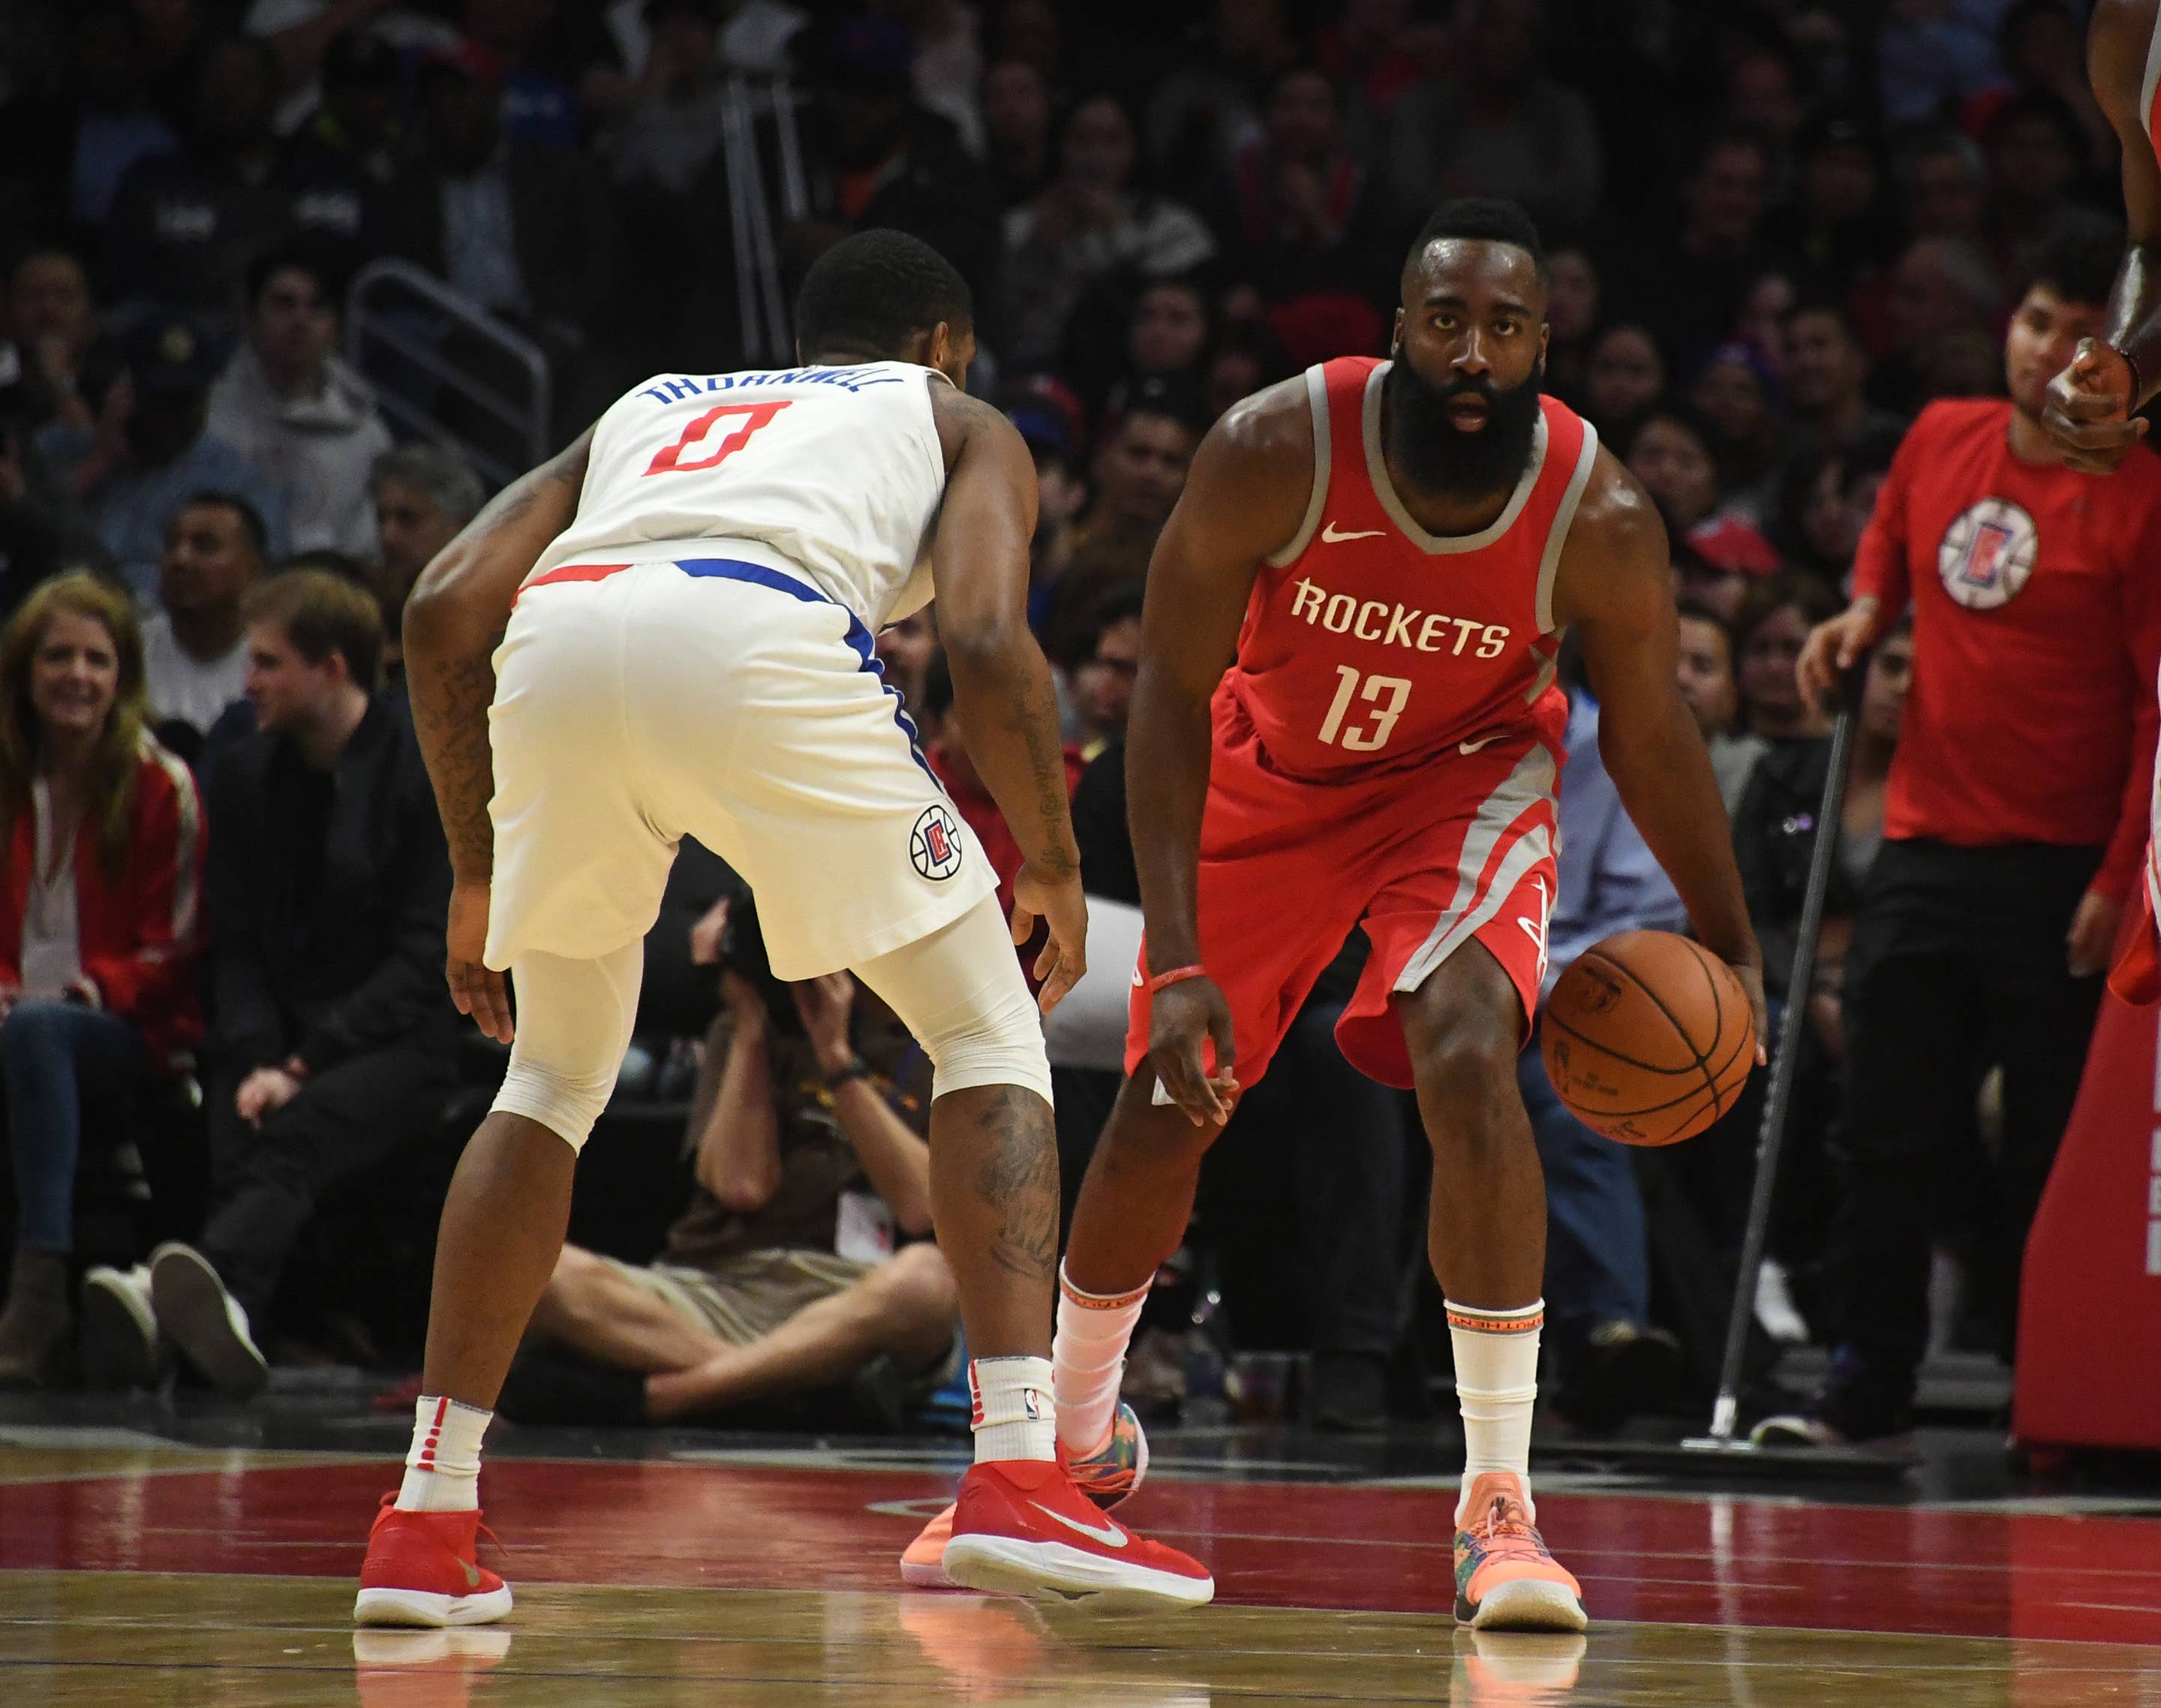 https://img.buzzfeed.com/buzzfeed-static/complex/images/hmiywgphlsiv9suehc9a/james-harden-clippers-rockets-feb-2018.jpg?output-format=jpg&output-quality=auto